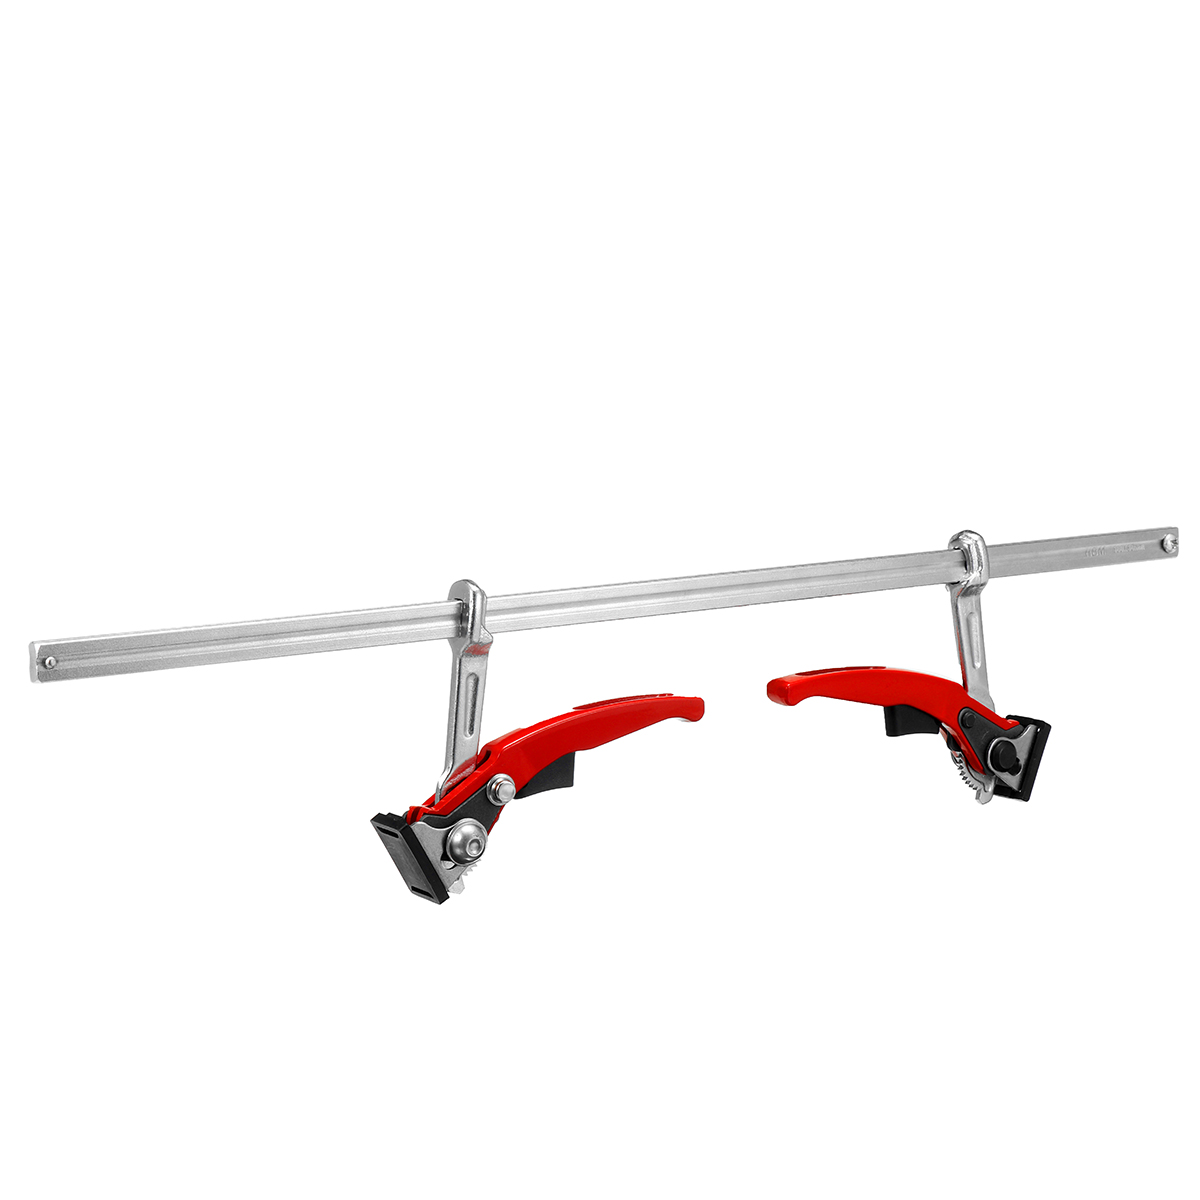 Double-Force-Variable-Clamp-Ratchet-F-Clamp-Tightened-And-Externally-Supported-Heavy-duty-F-Clamp-Wo-1901636-3